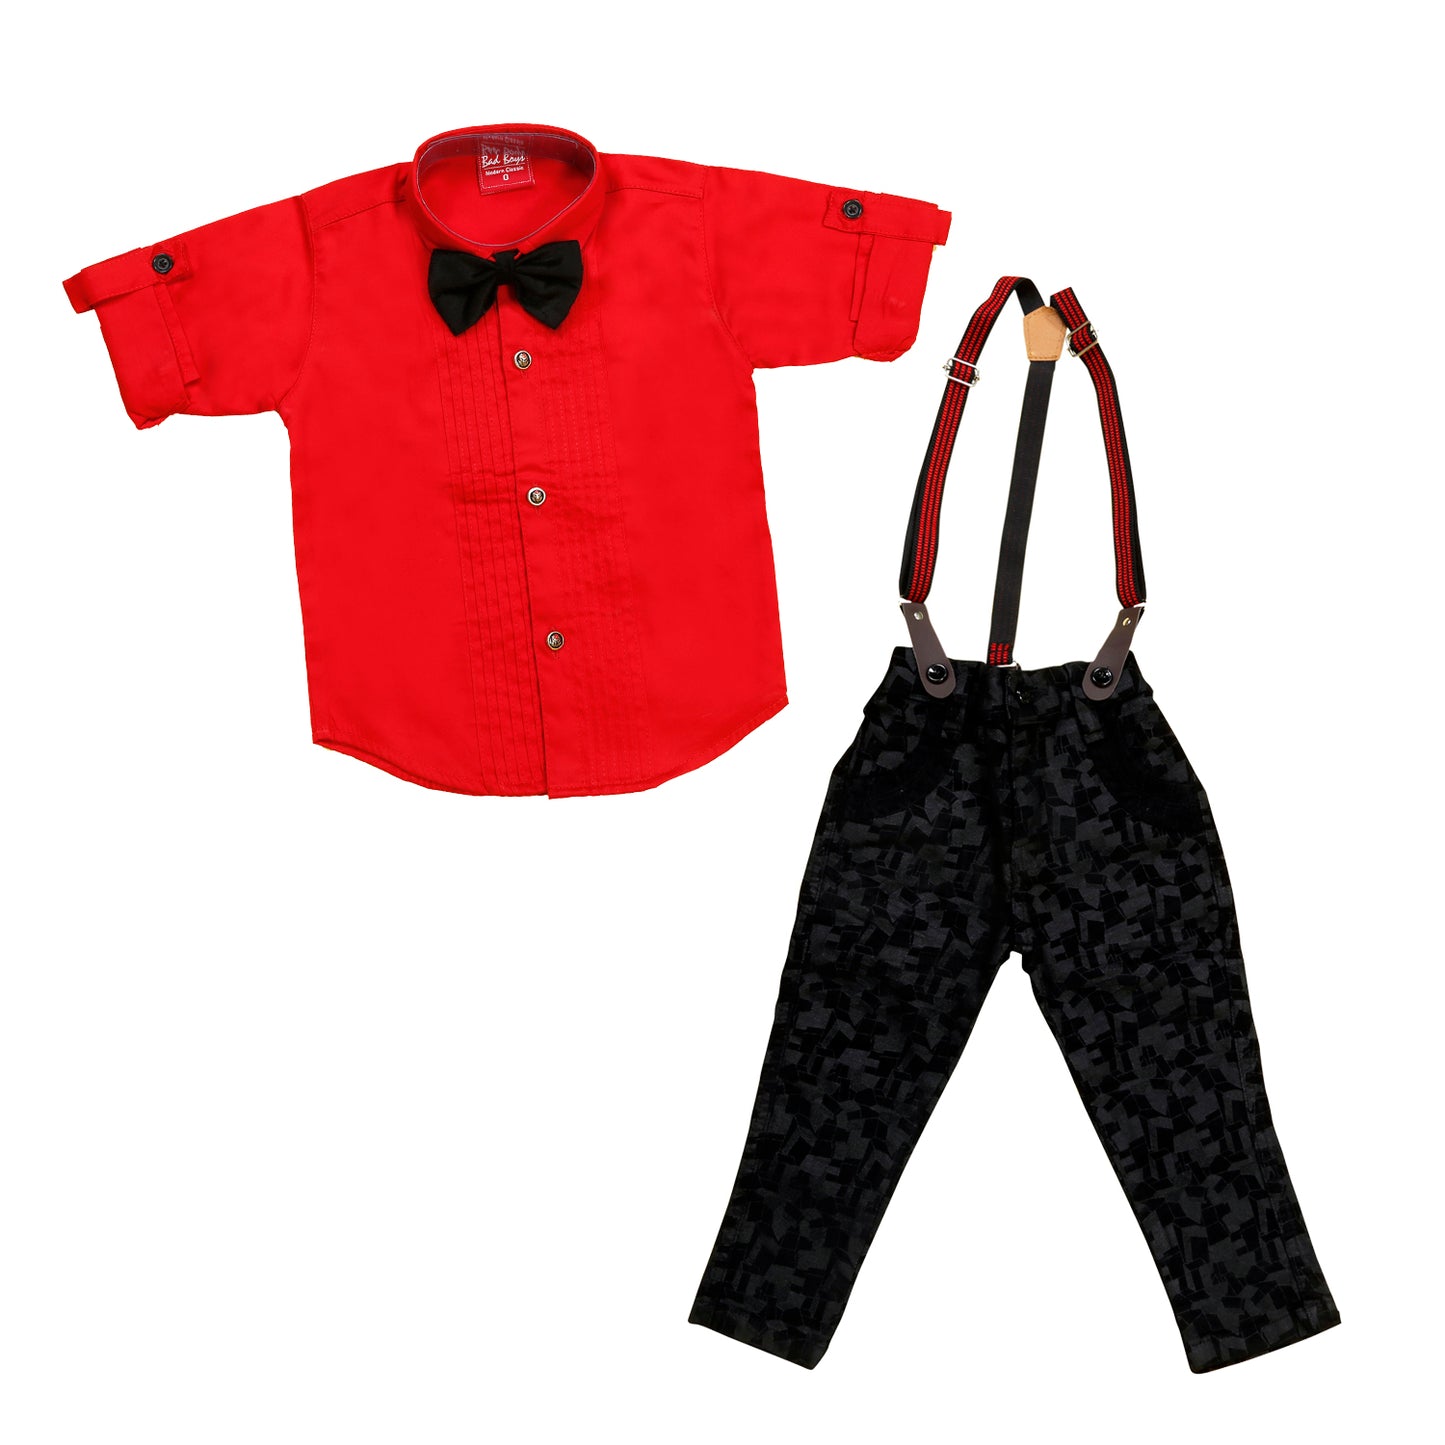 Bad Boys Plaid Party Wear Outfit with Suspenders and a Bow tie. - mashup boys